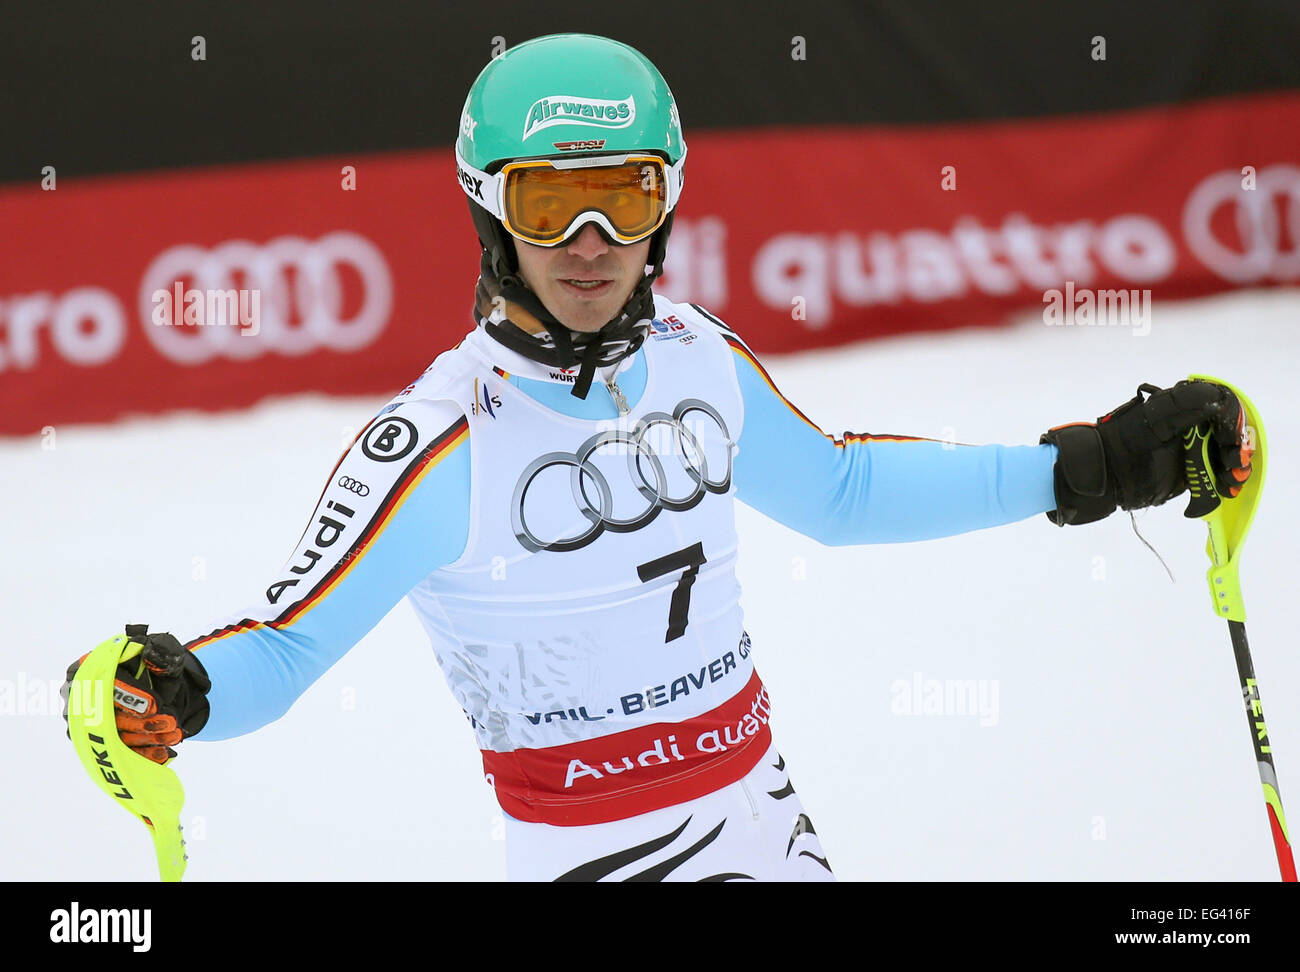 Felix Neureuther of Germany reacts after the first run of the mens slalom at the Alpine Skiing World Championships in Vail - Beaver Creek, Colorado, USA, 15 February 2015. Photo: Stephan Jansen/dpa Stock Photo